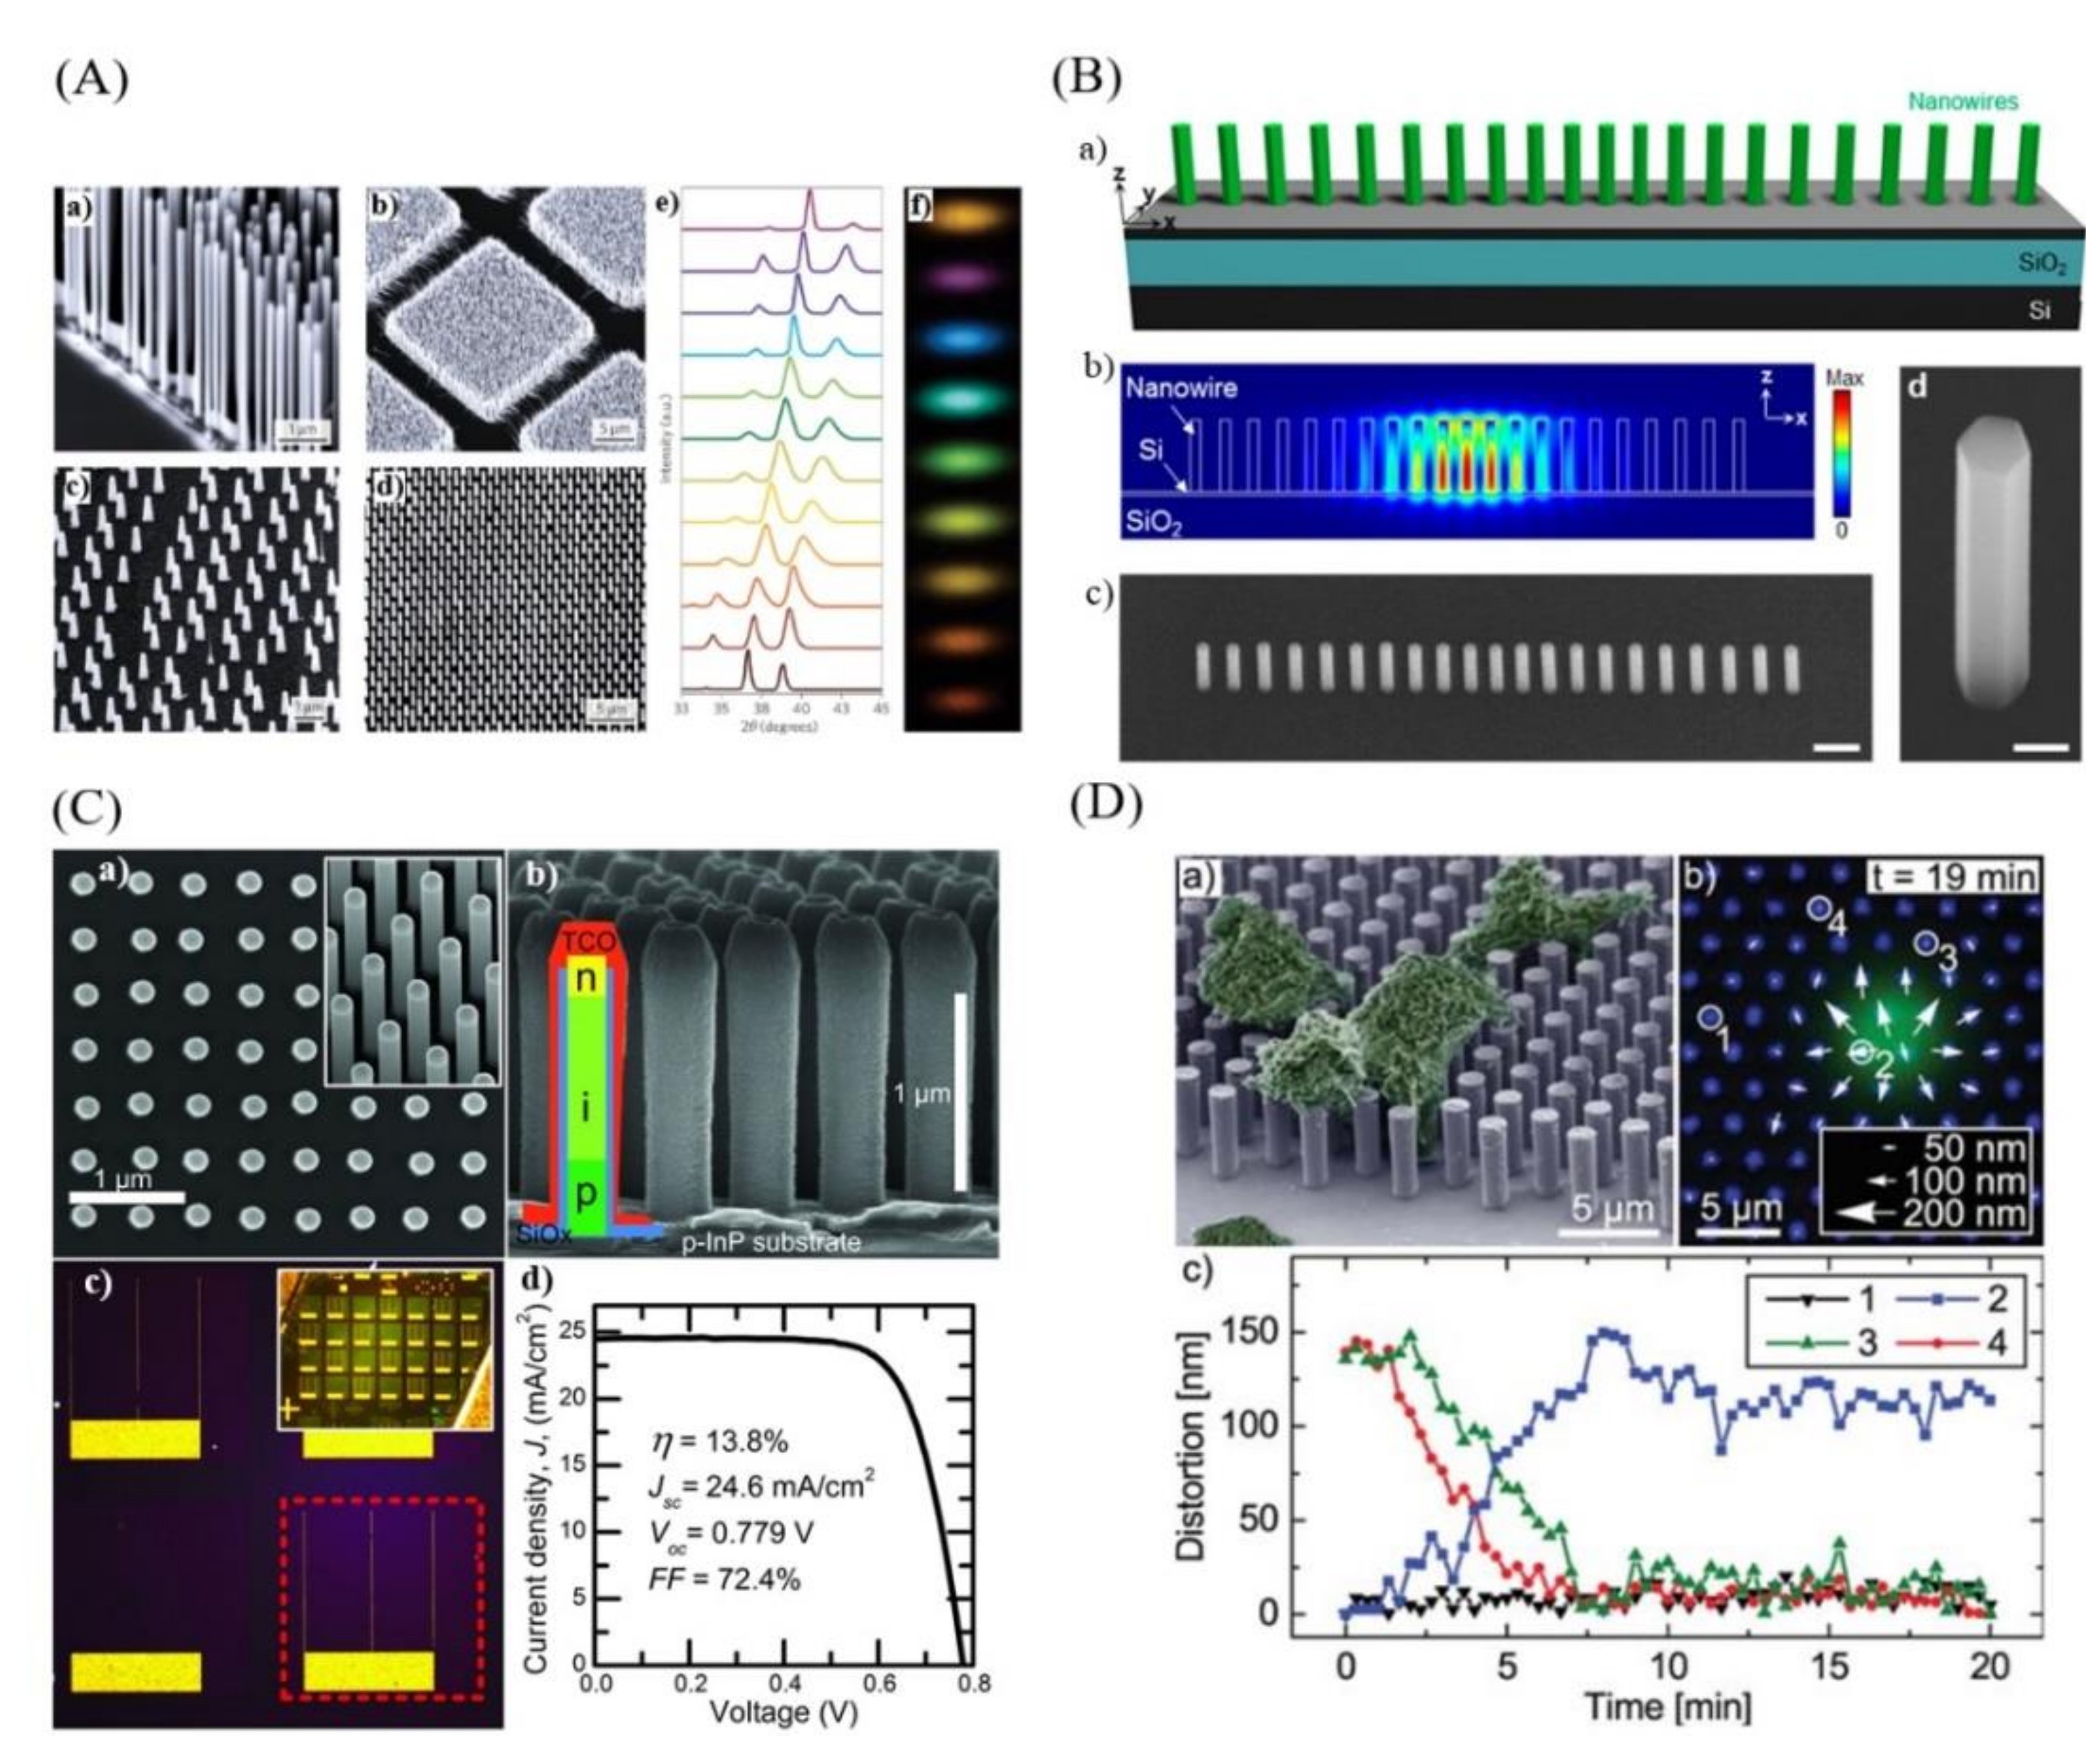 Sanctuary Ydmyg forfremmelse Nanomaterials | Free Full-Text | Surface Nano-Patterning for the Bottom-Up  Growth of III-V Semiconductor Nanowire Ordered Arrays | HTML